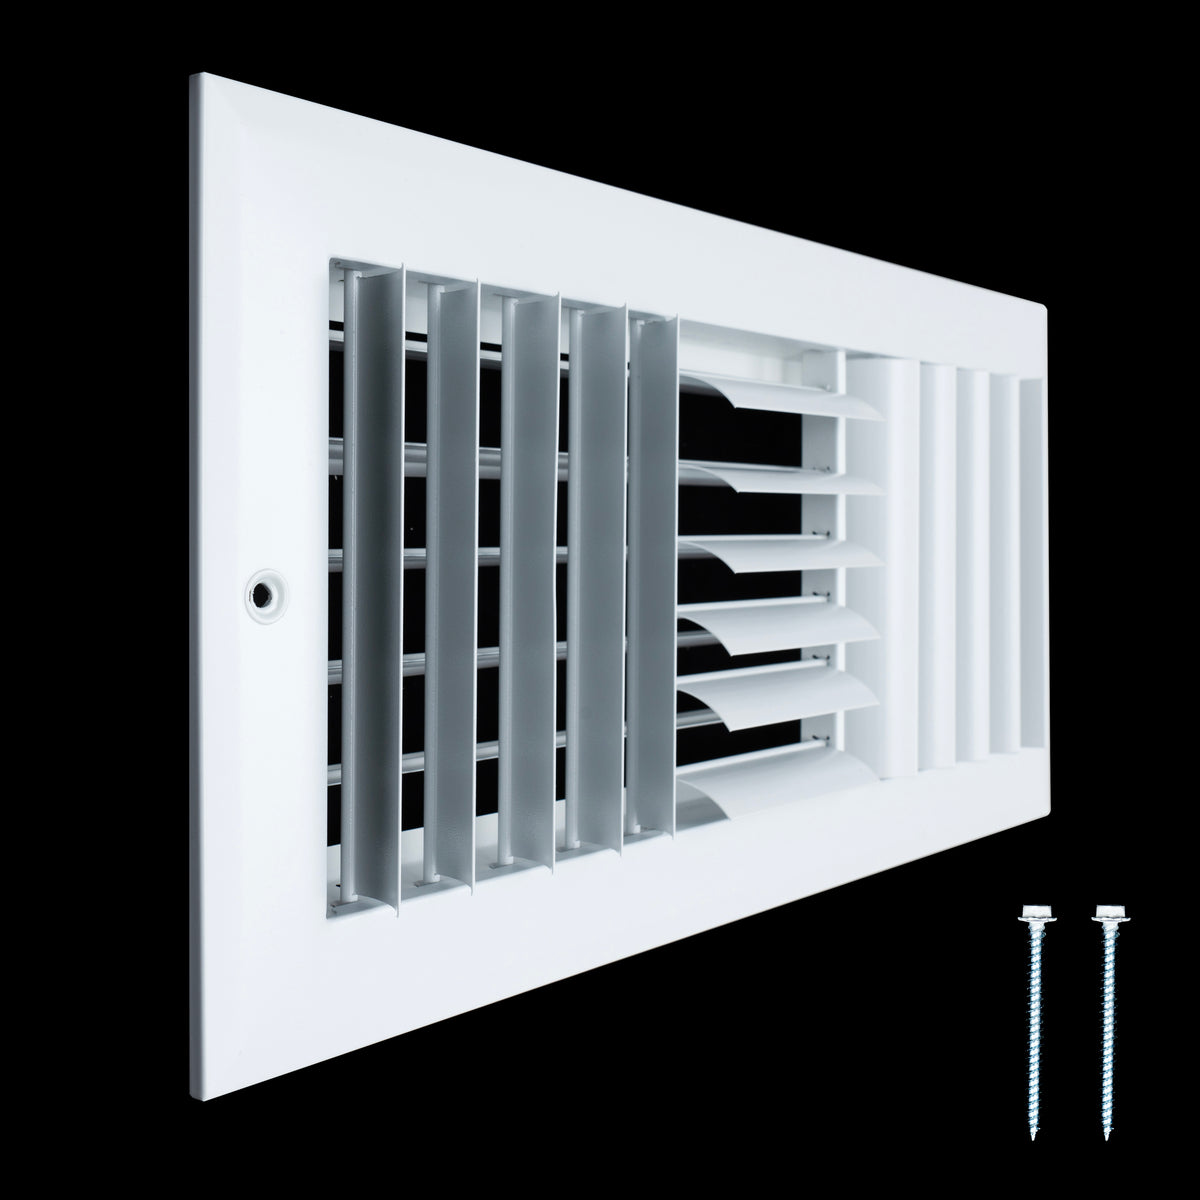 14"W x 6"H [Duct Opening] Aluminum 3-WAY Adjustable Air Supply Grille | Register Vent Cover Grill for Sidewall and Ceiling | White | Outer Dimensions: 15.75"W x 7.75"